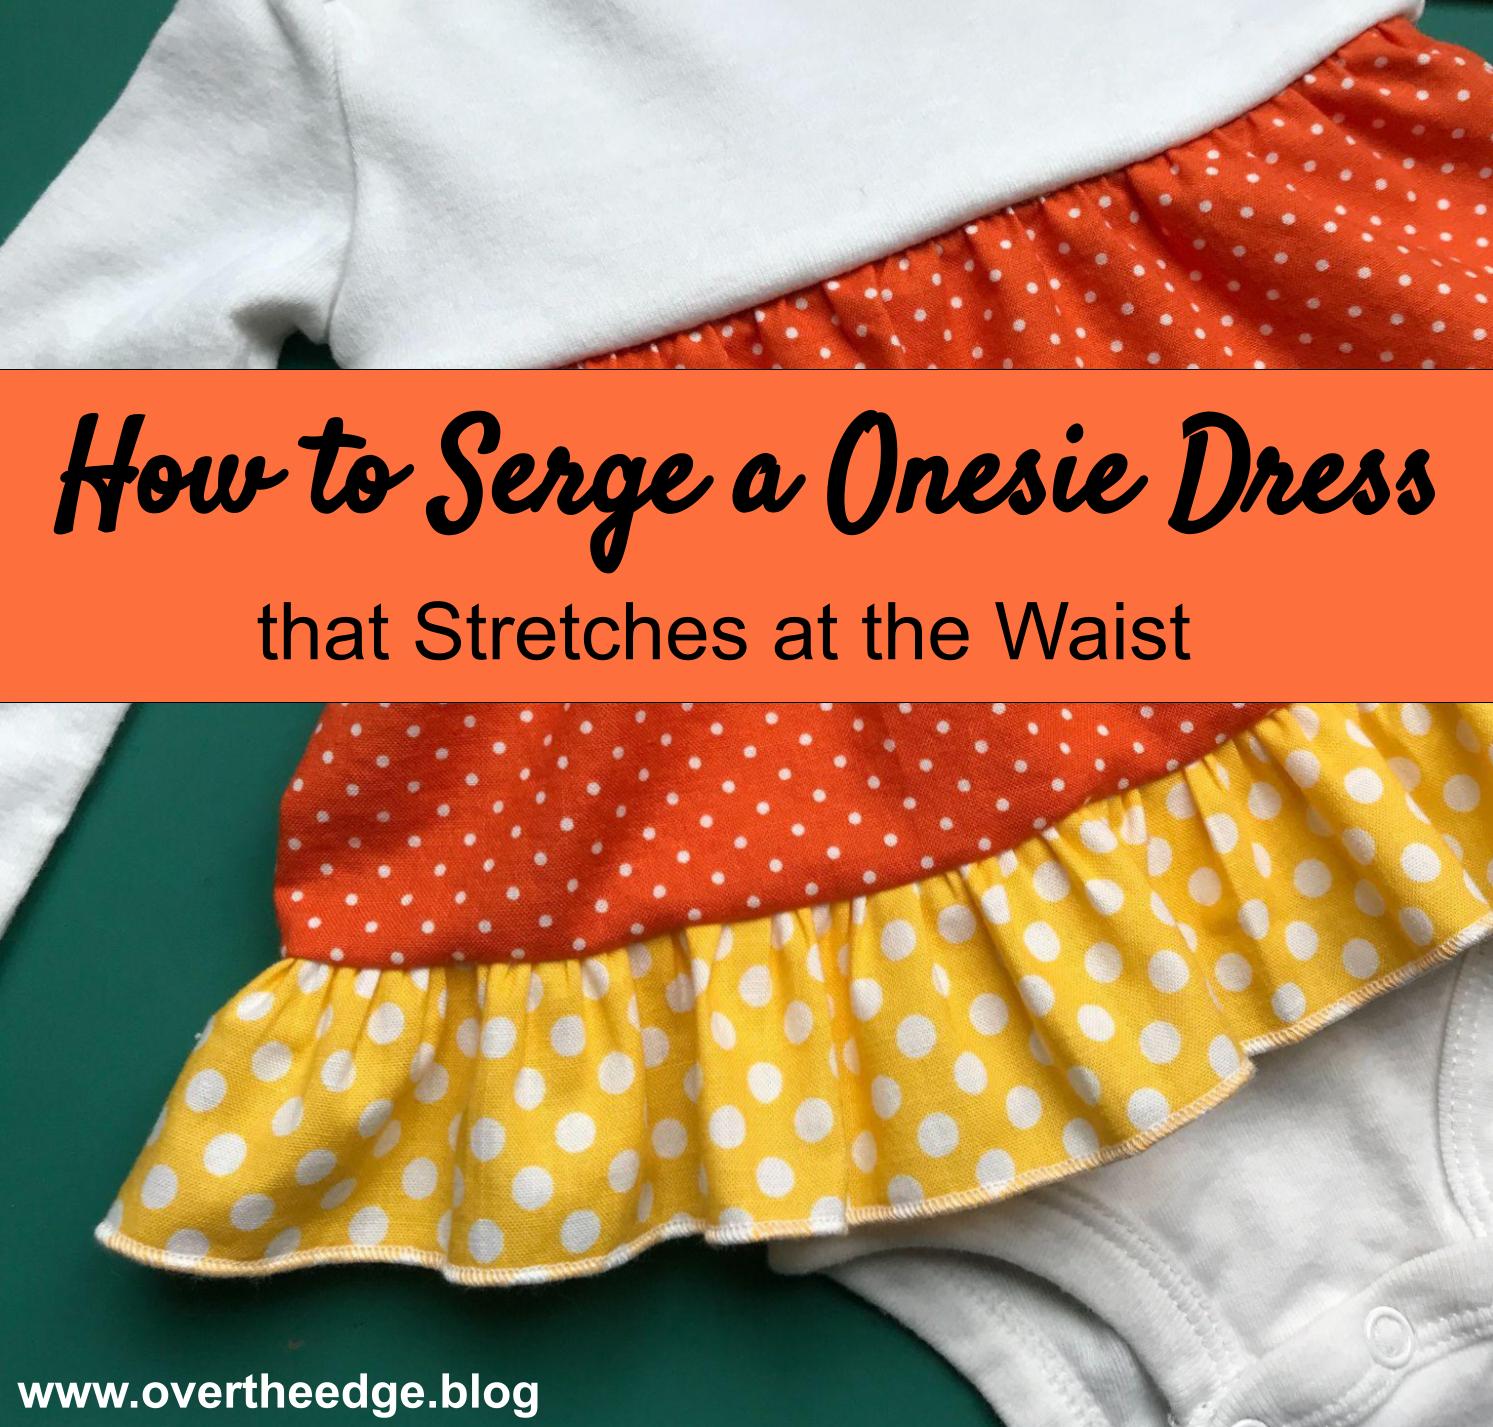 How to Serge a Onesie Dress that Stretches at the Waist